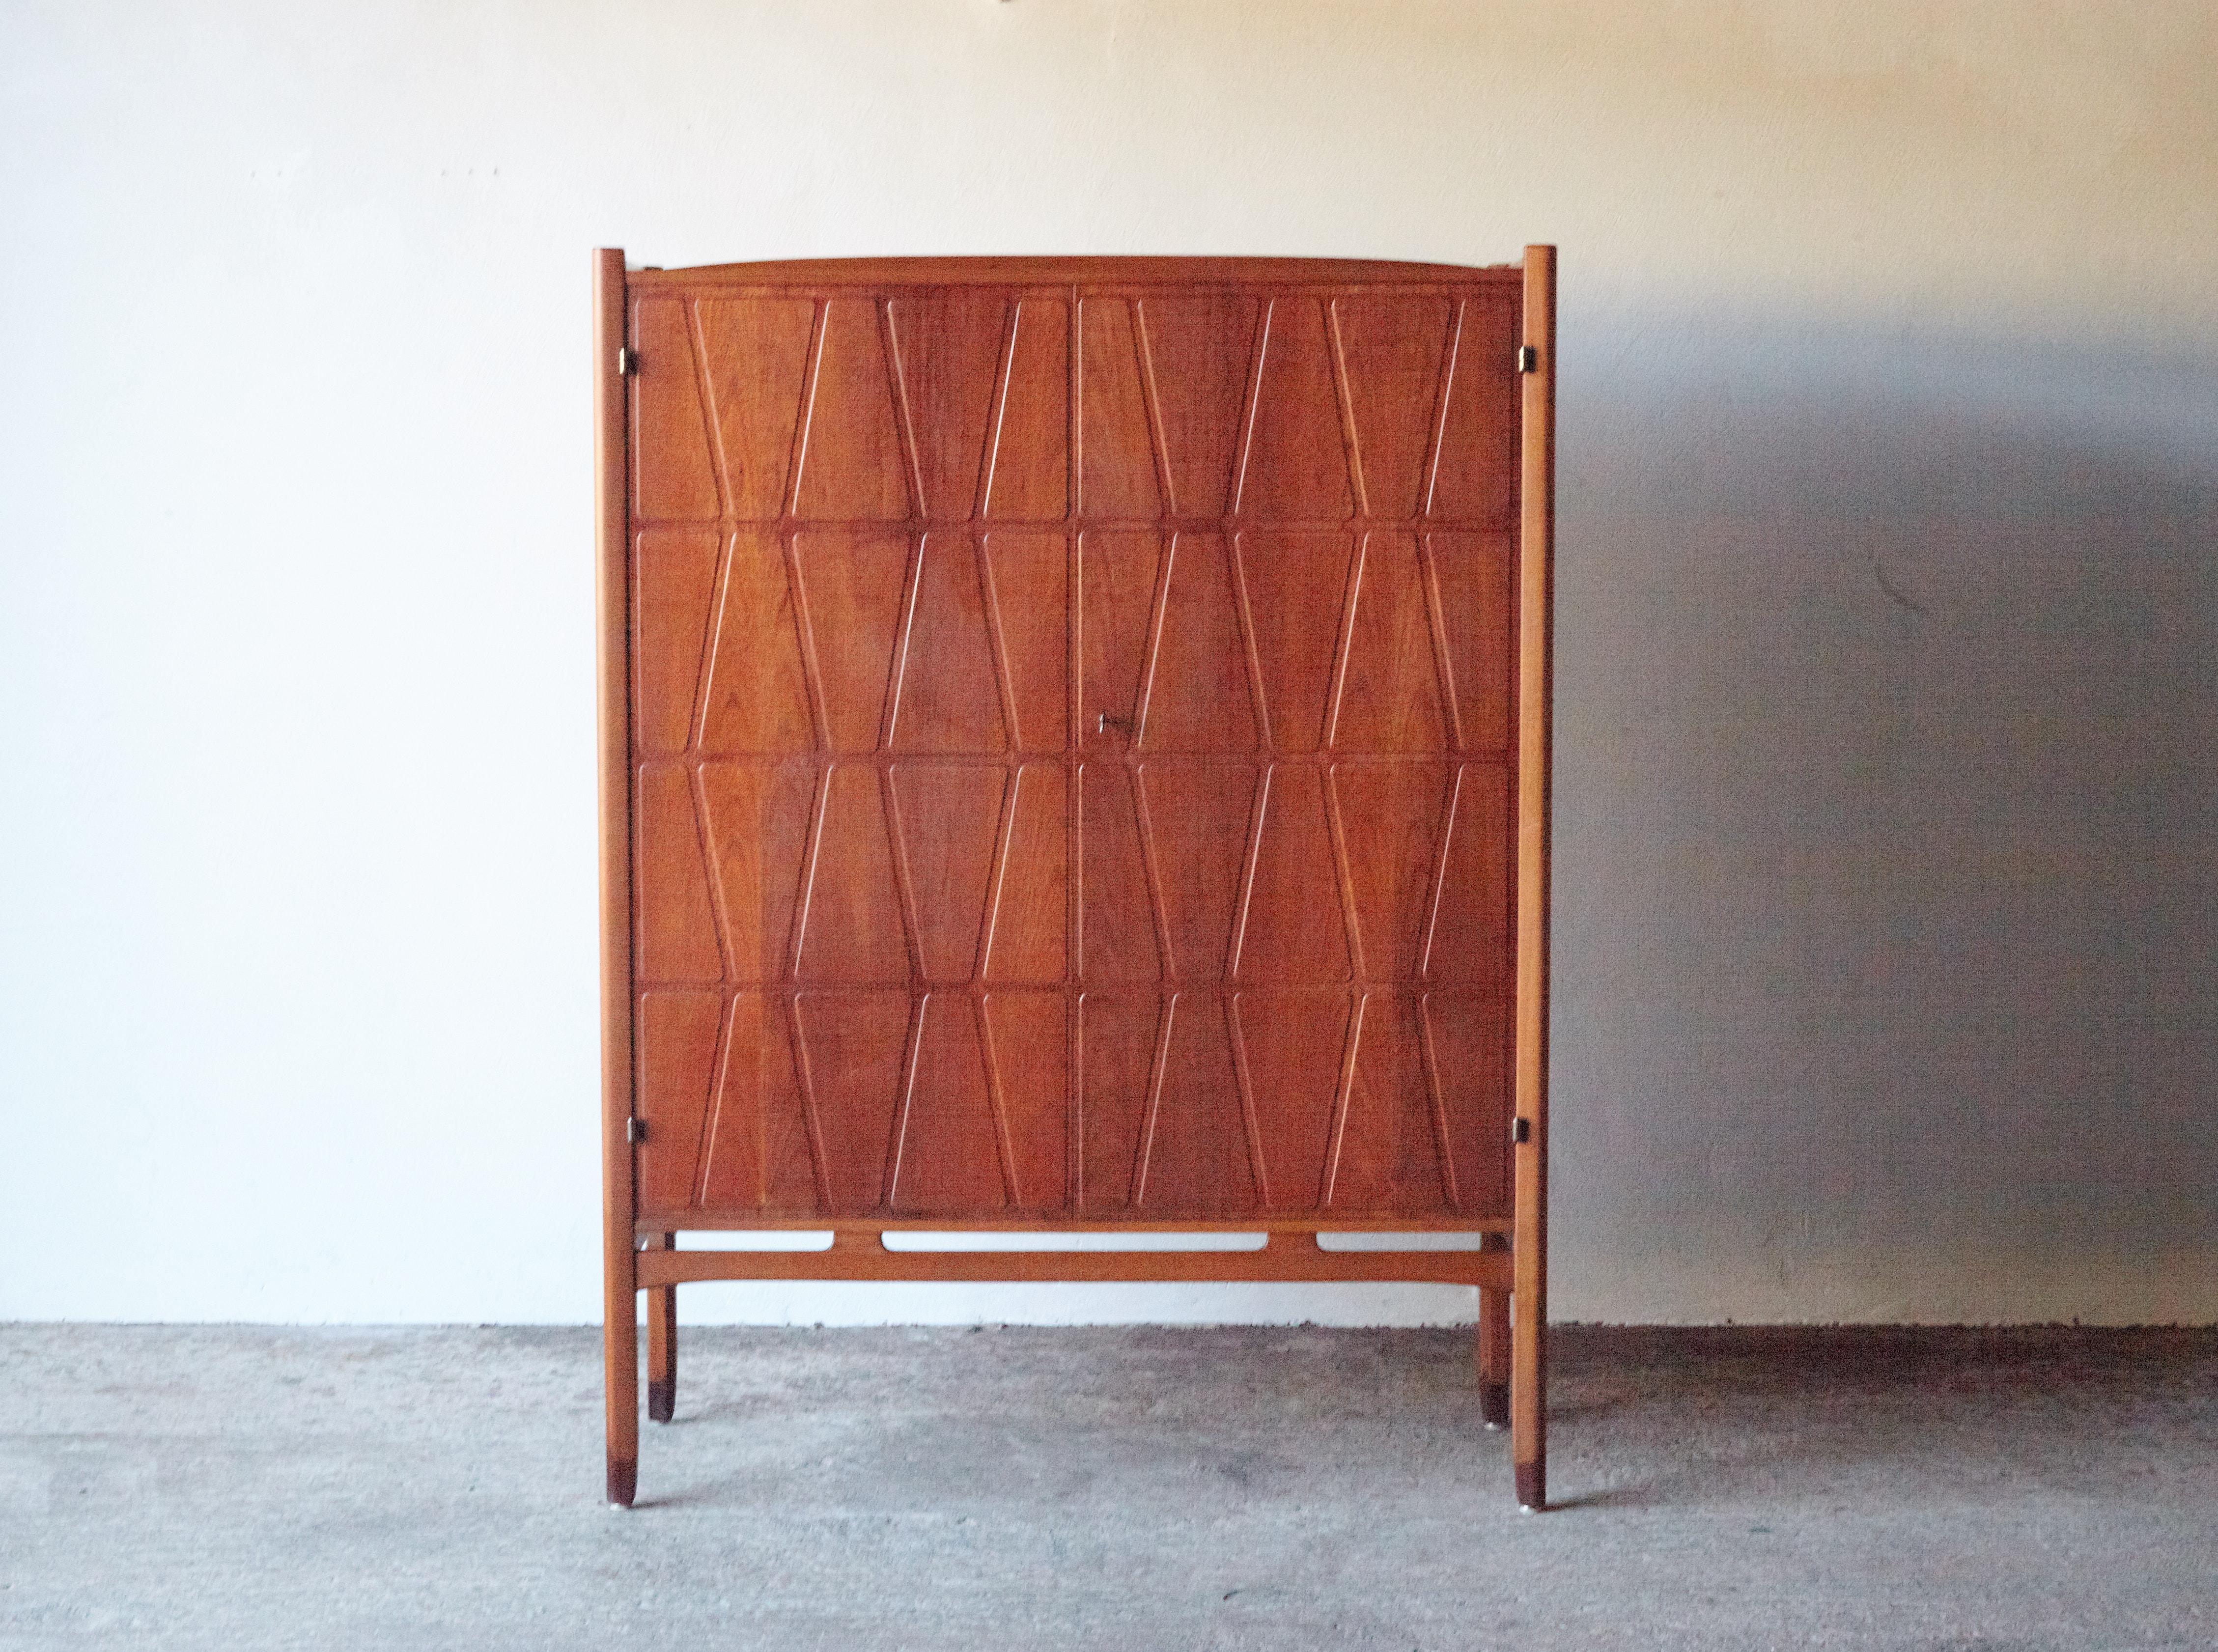 A wonderful Bangkok cabinet designed by Yngve Ekström for Westbergs Mobler, Sweden, 1950s. Solid beech legs with teak doors and sides. Inside there are three drawers and adjustable shelves. Very good original vintage condition with key present.